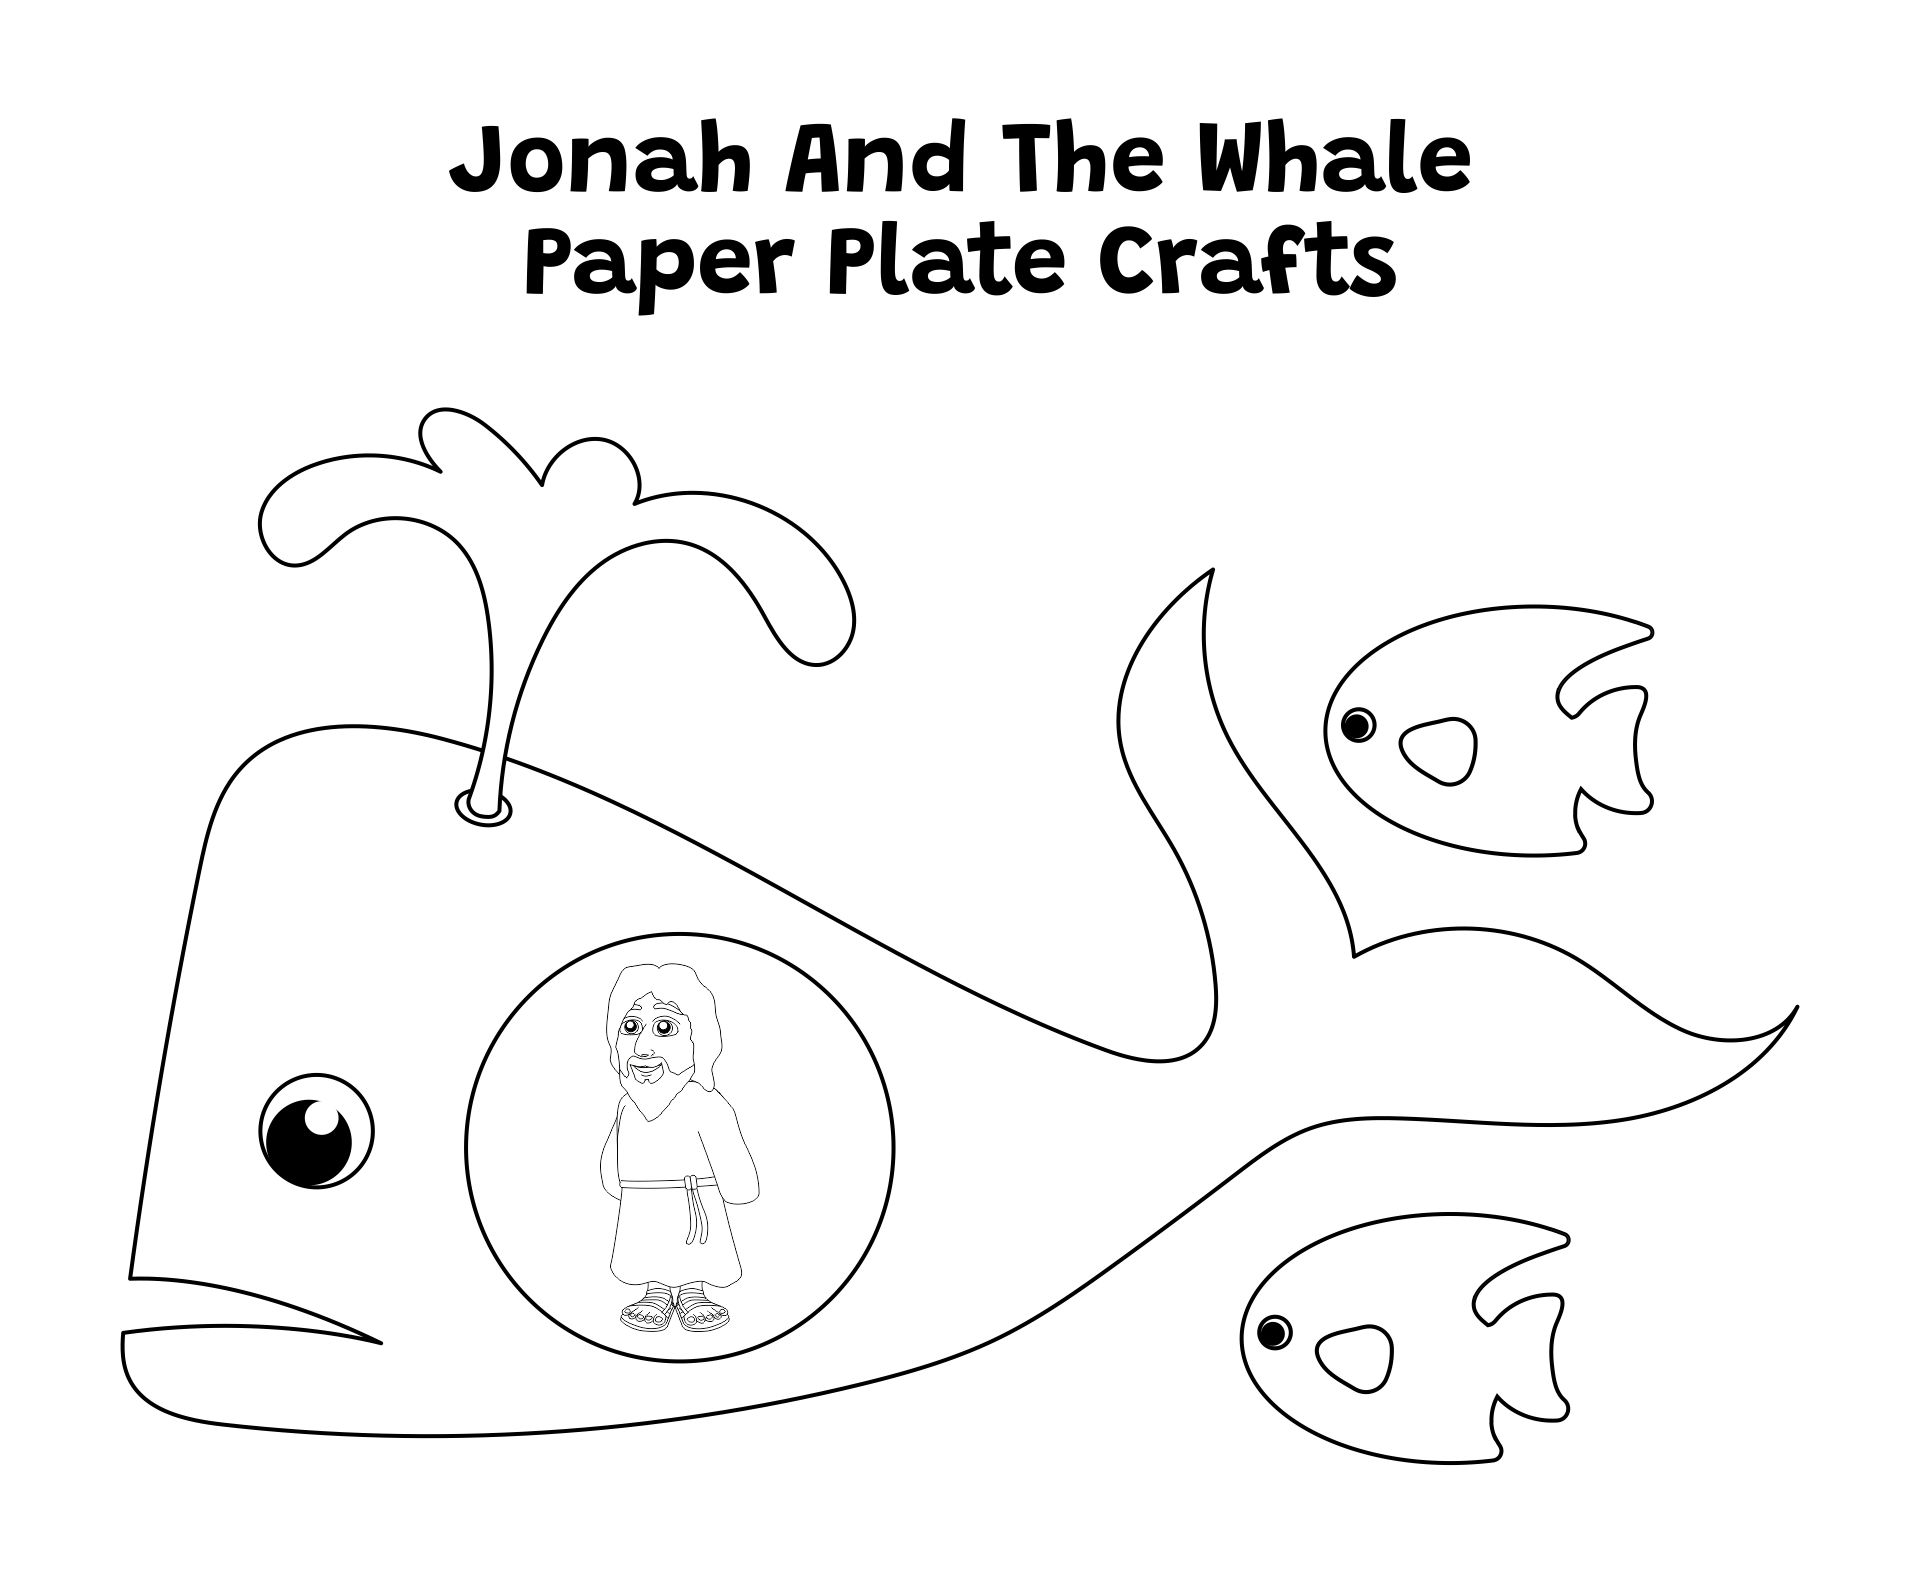 Jonah and the Whale Crafts